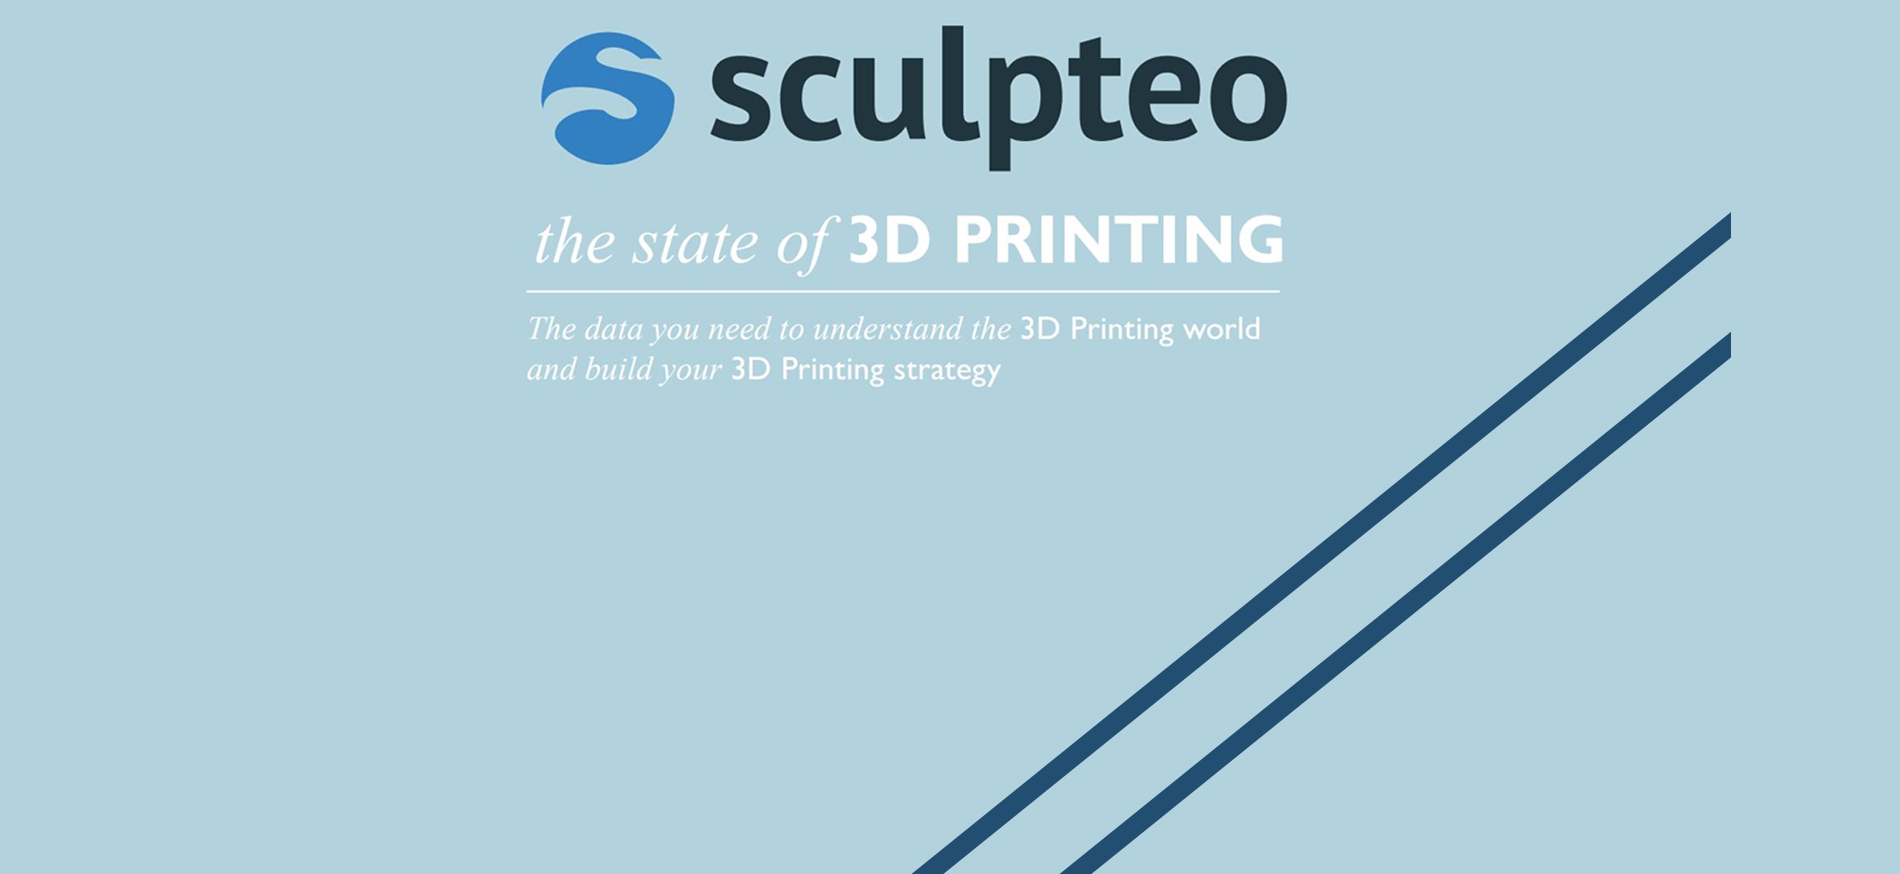 Sculpteo_state_of_3d_printing